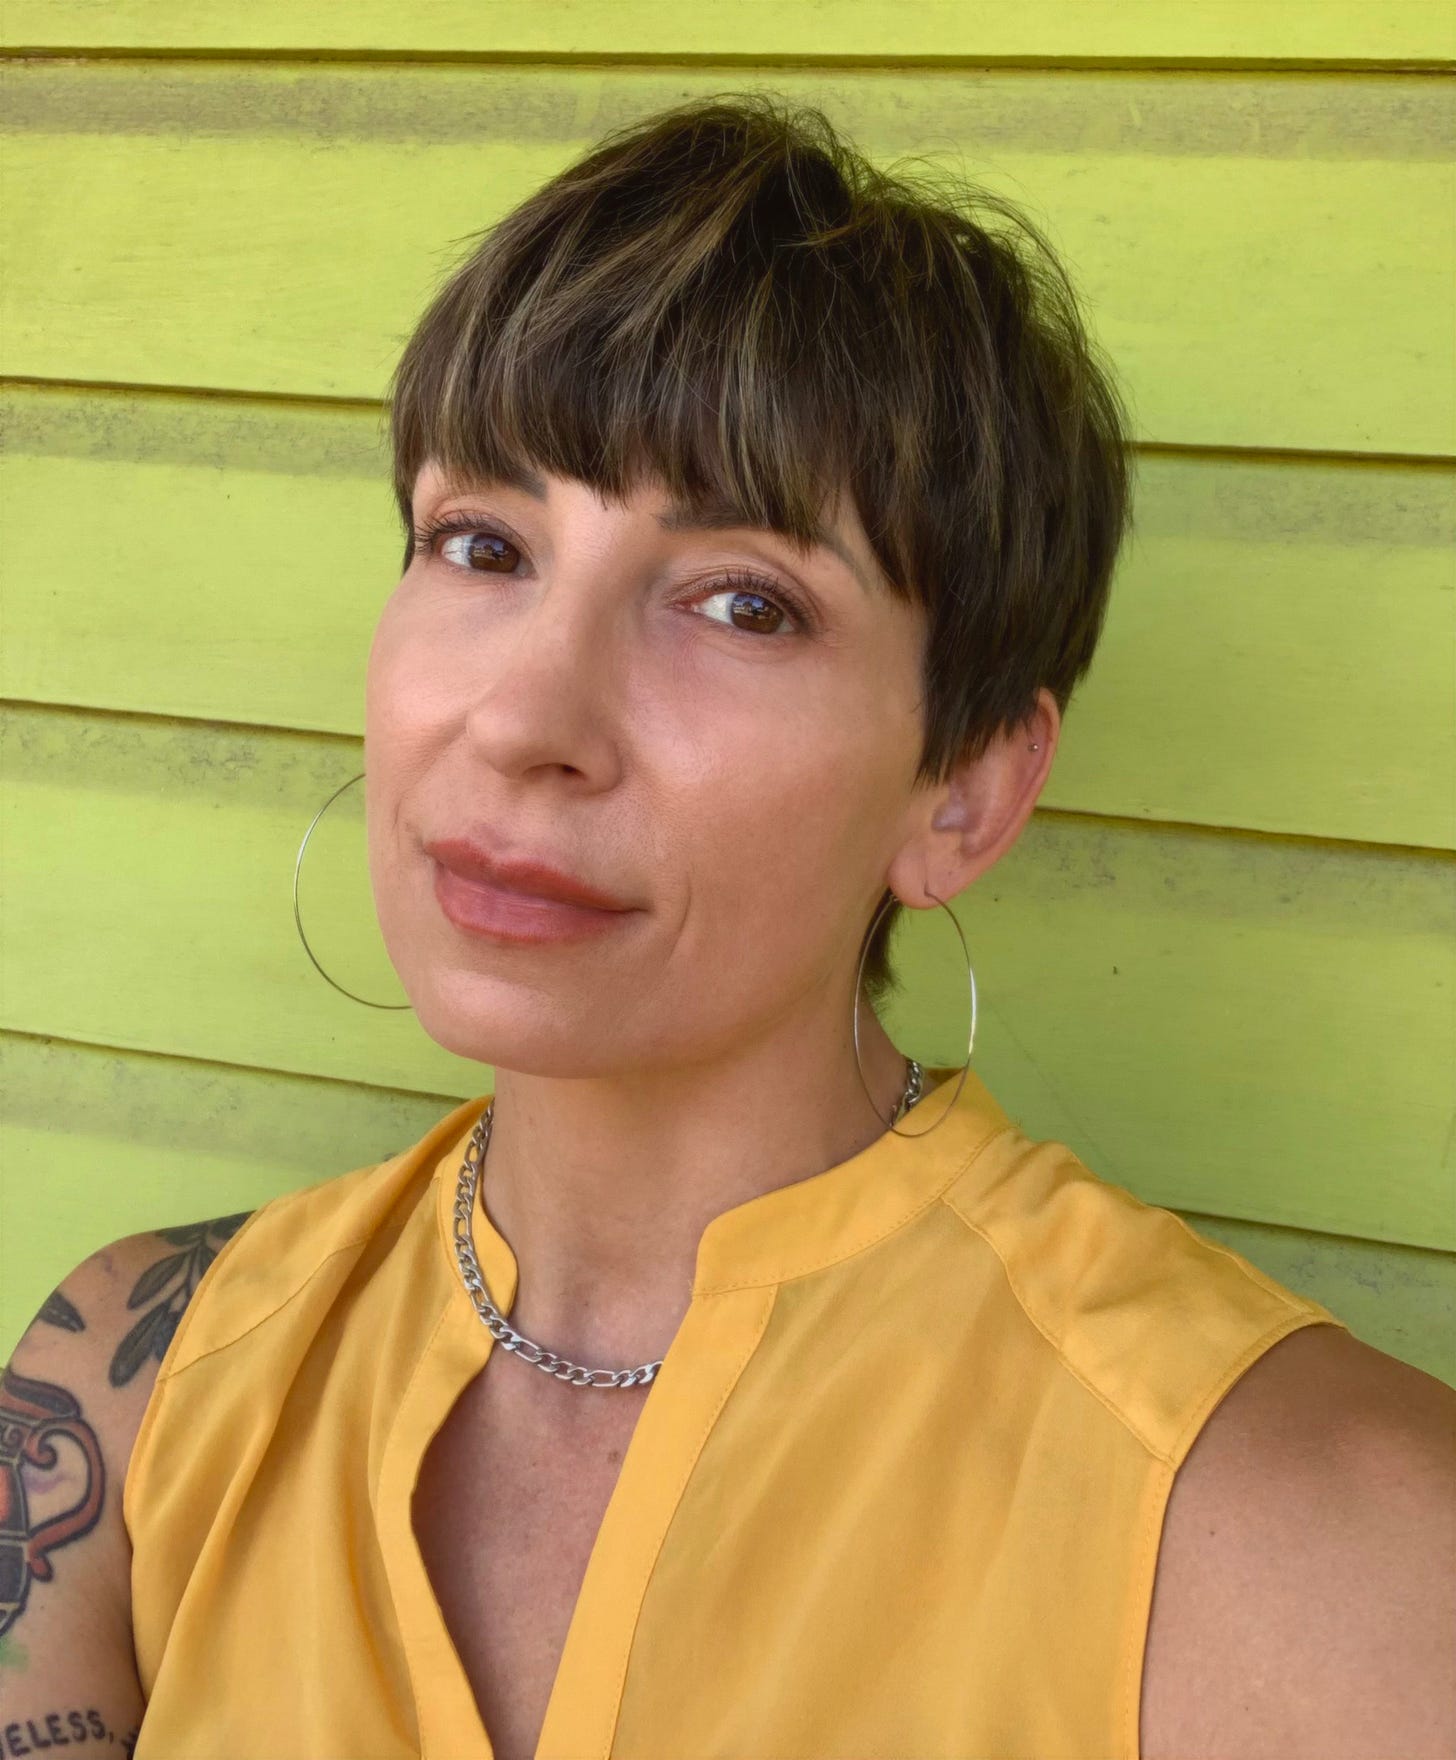 A nonbinary person in a yellow tank top leans against green house shingles. They wear hoop earrings and a short haircut about their ears